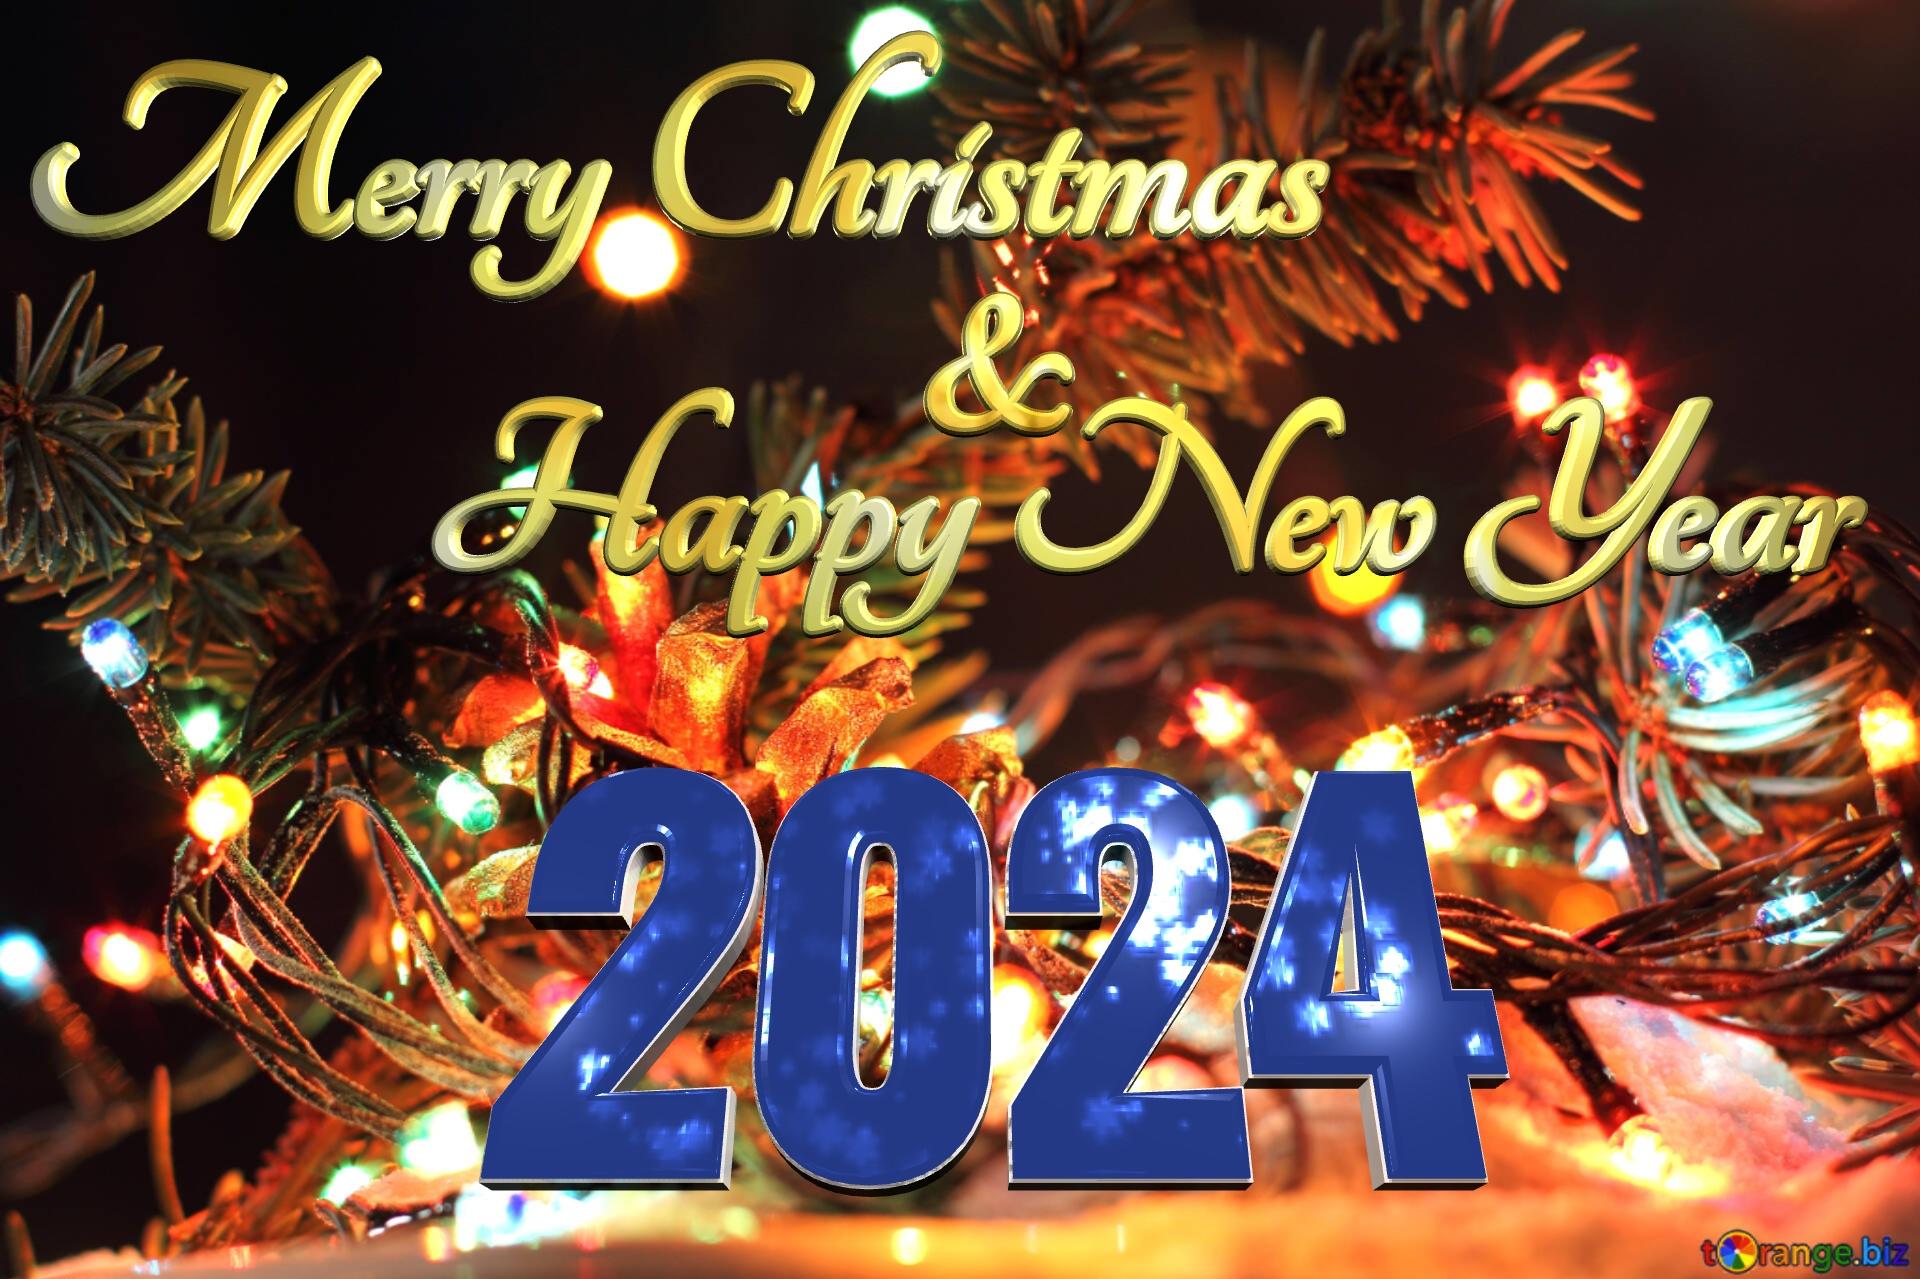 Merry Christmas And Happy New Year Free Image